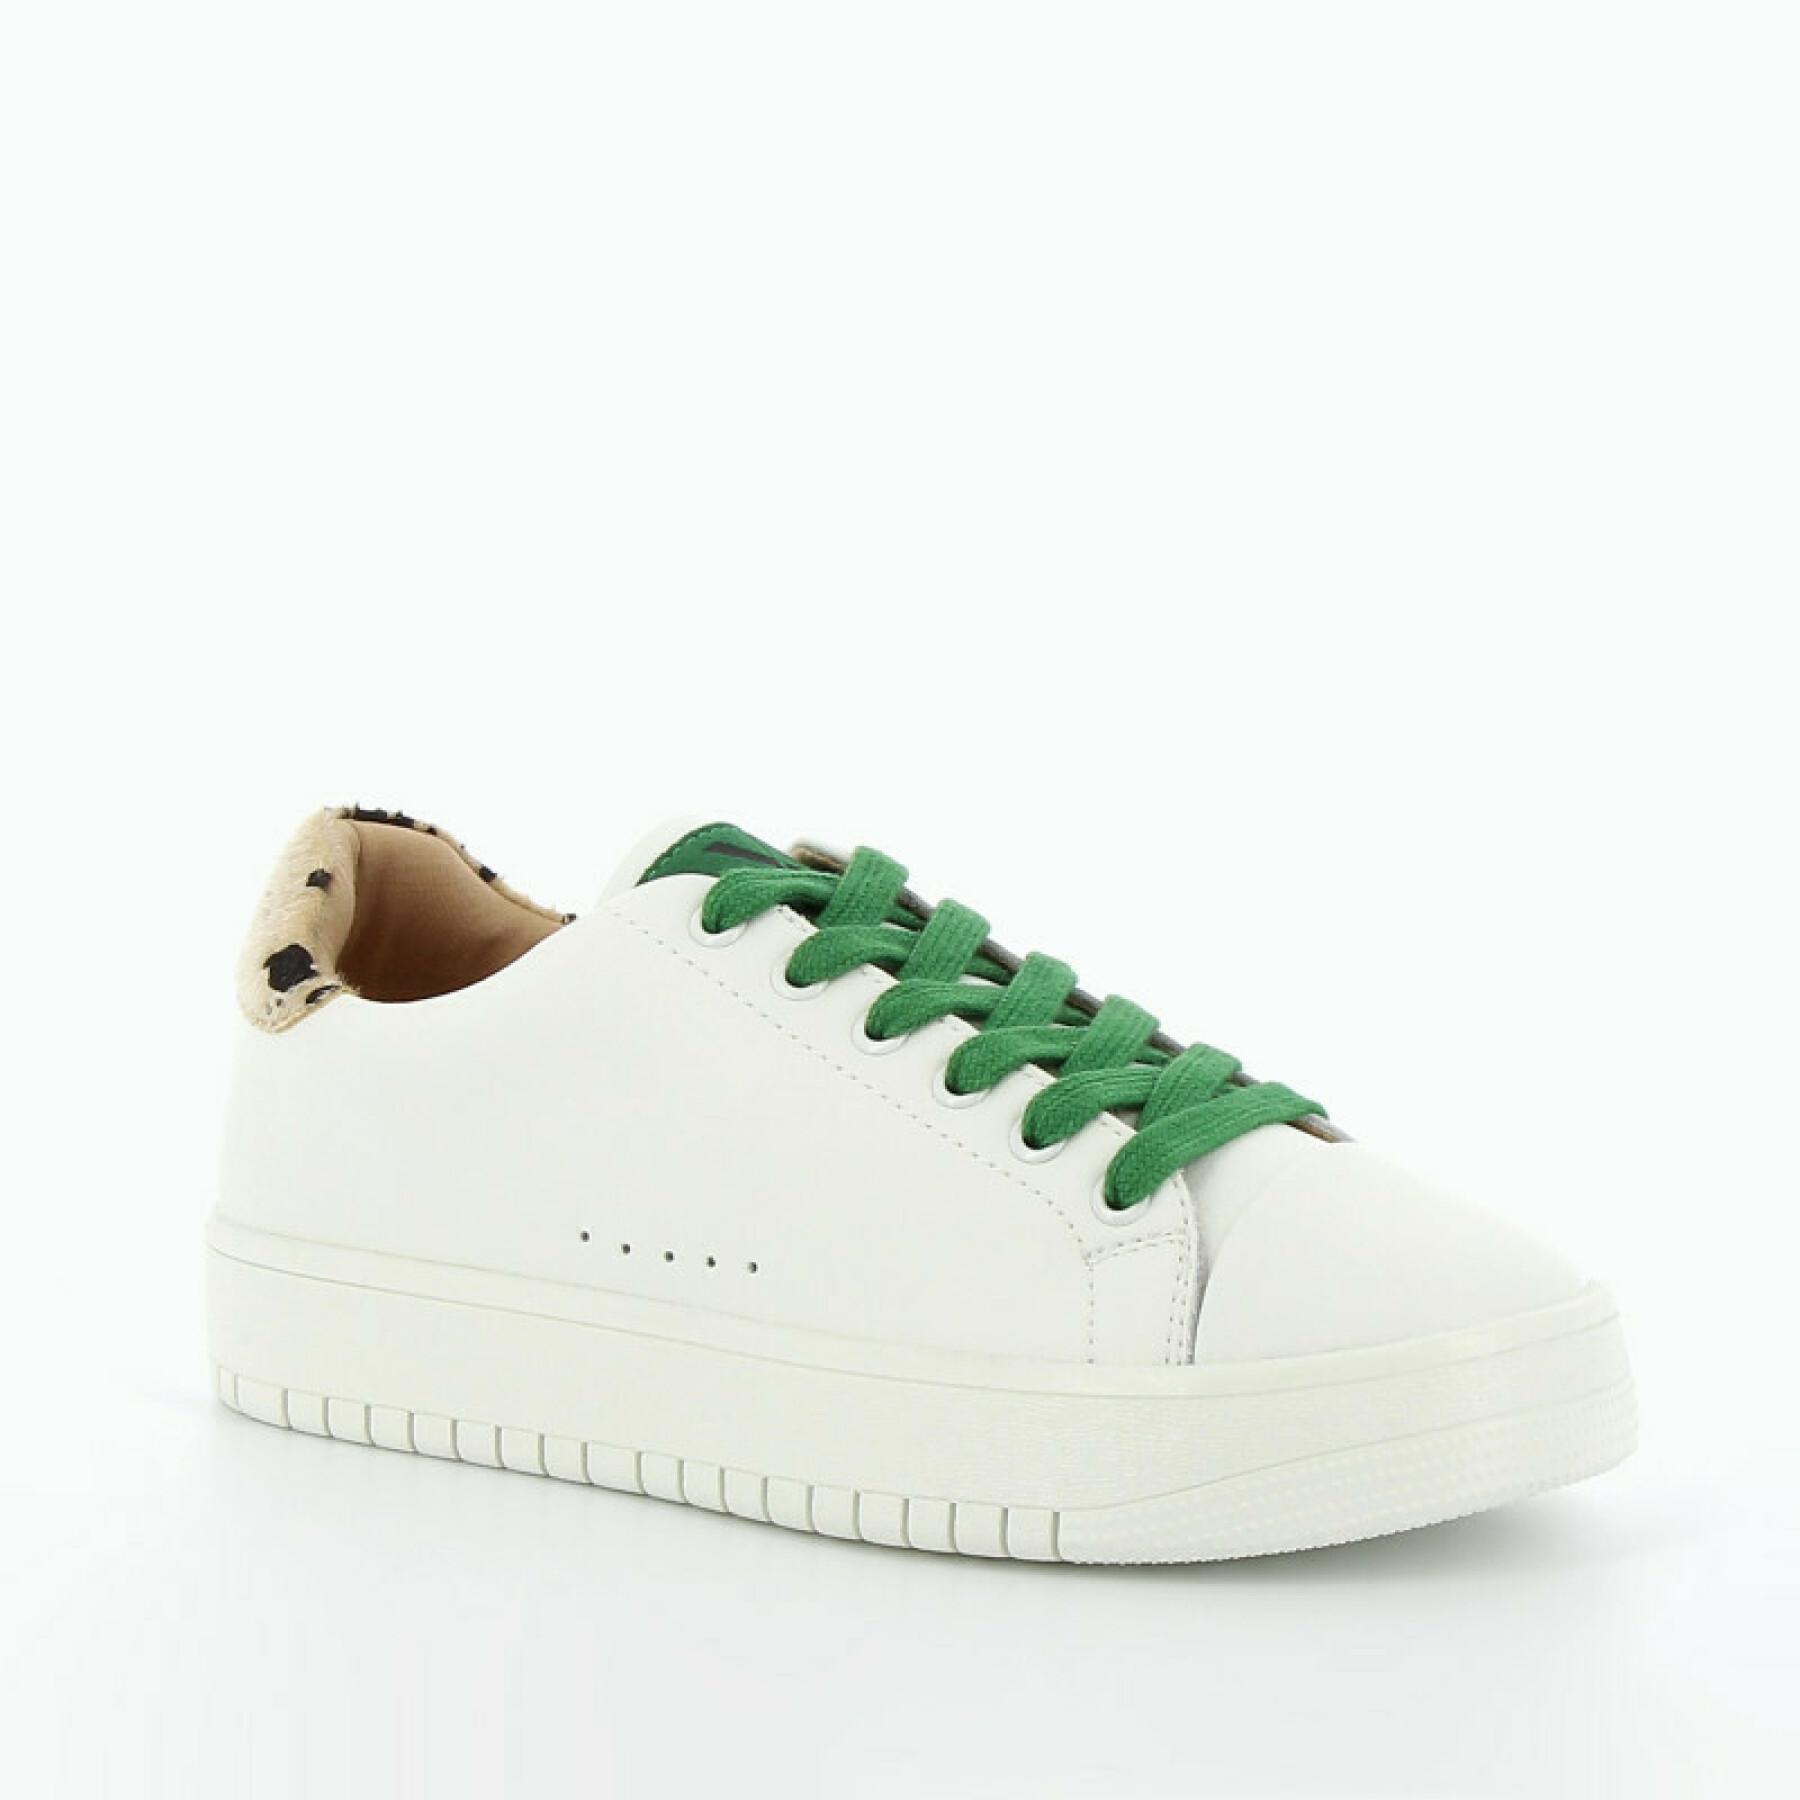 Women's sneakers Vanessa Wu blanches à lacets verts